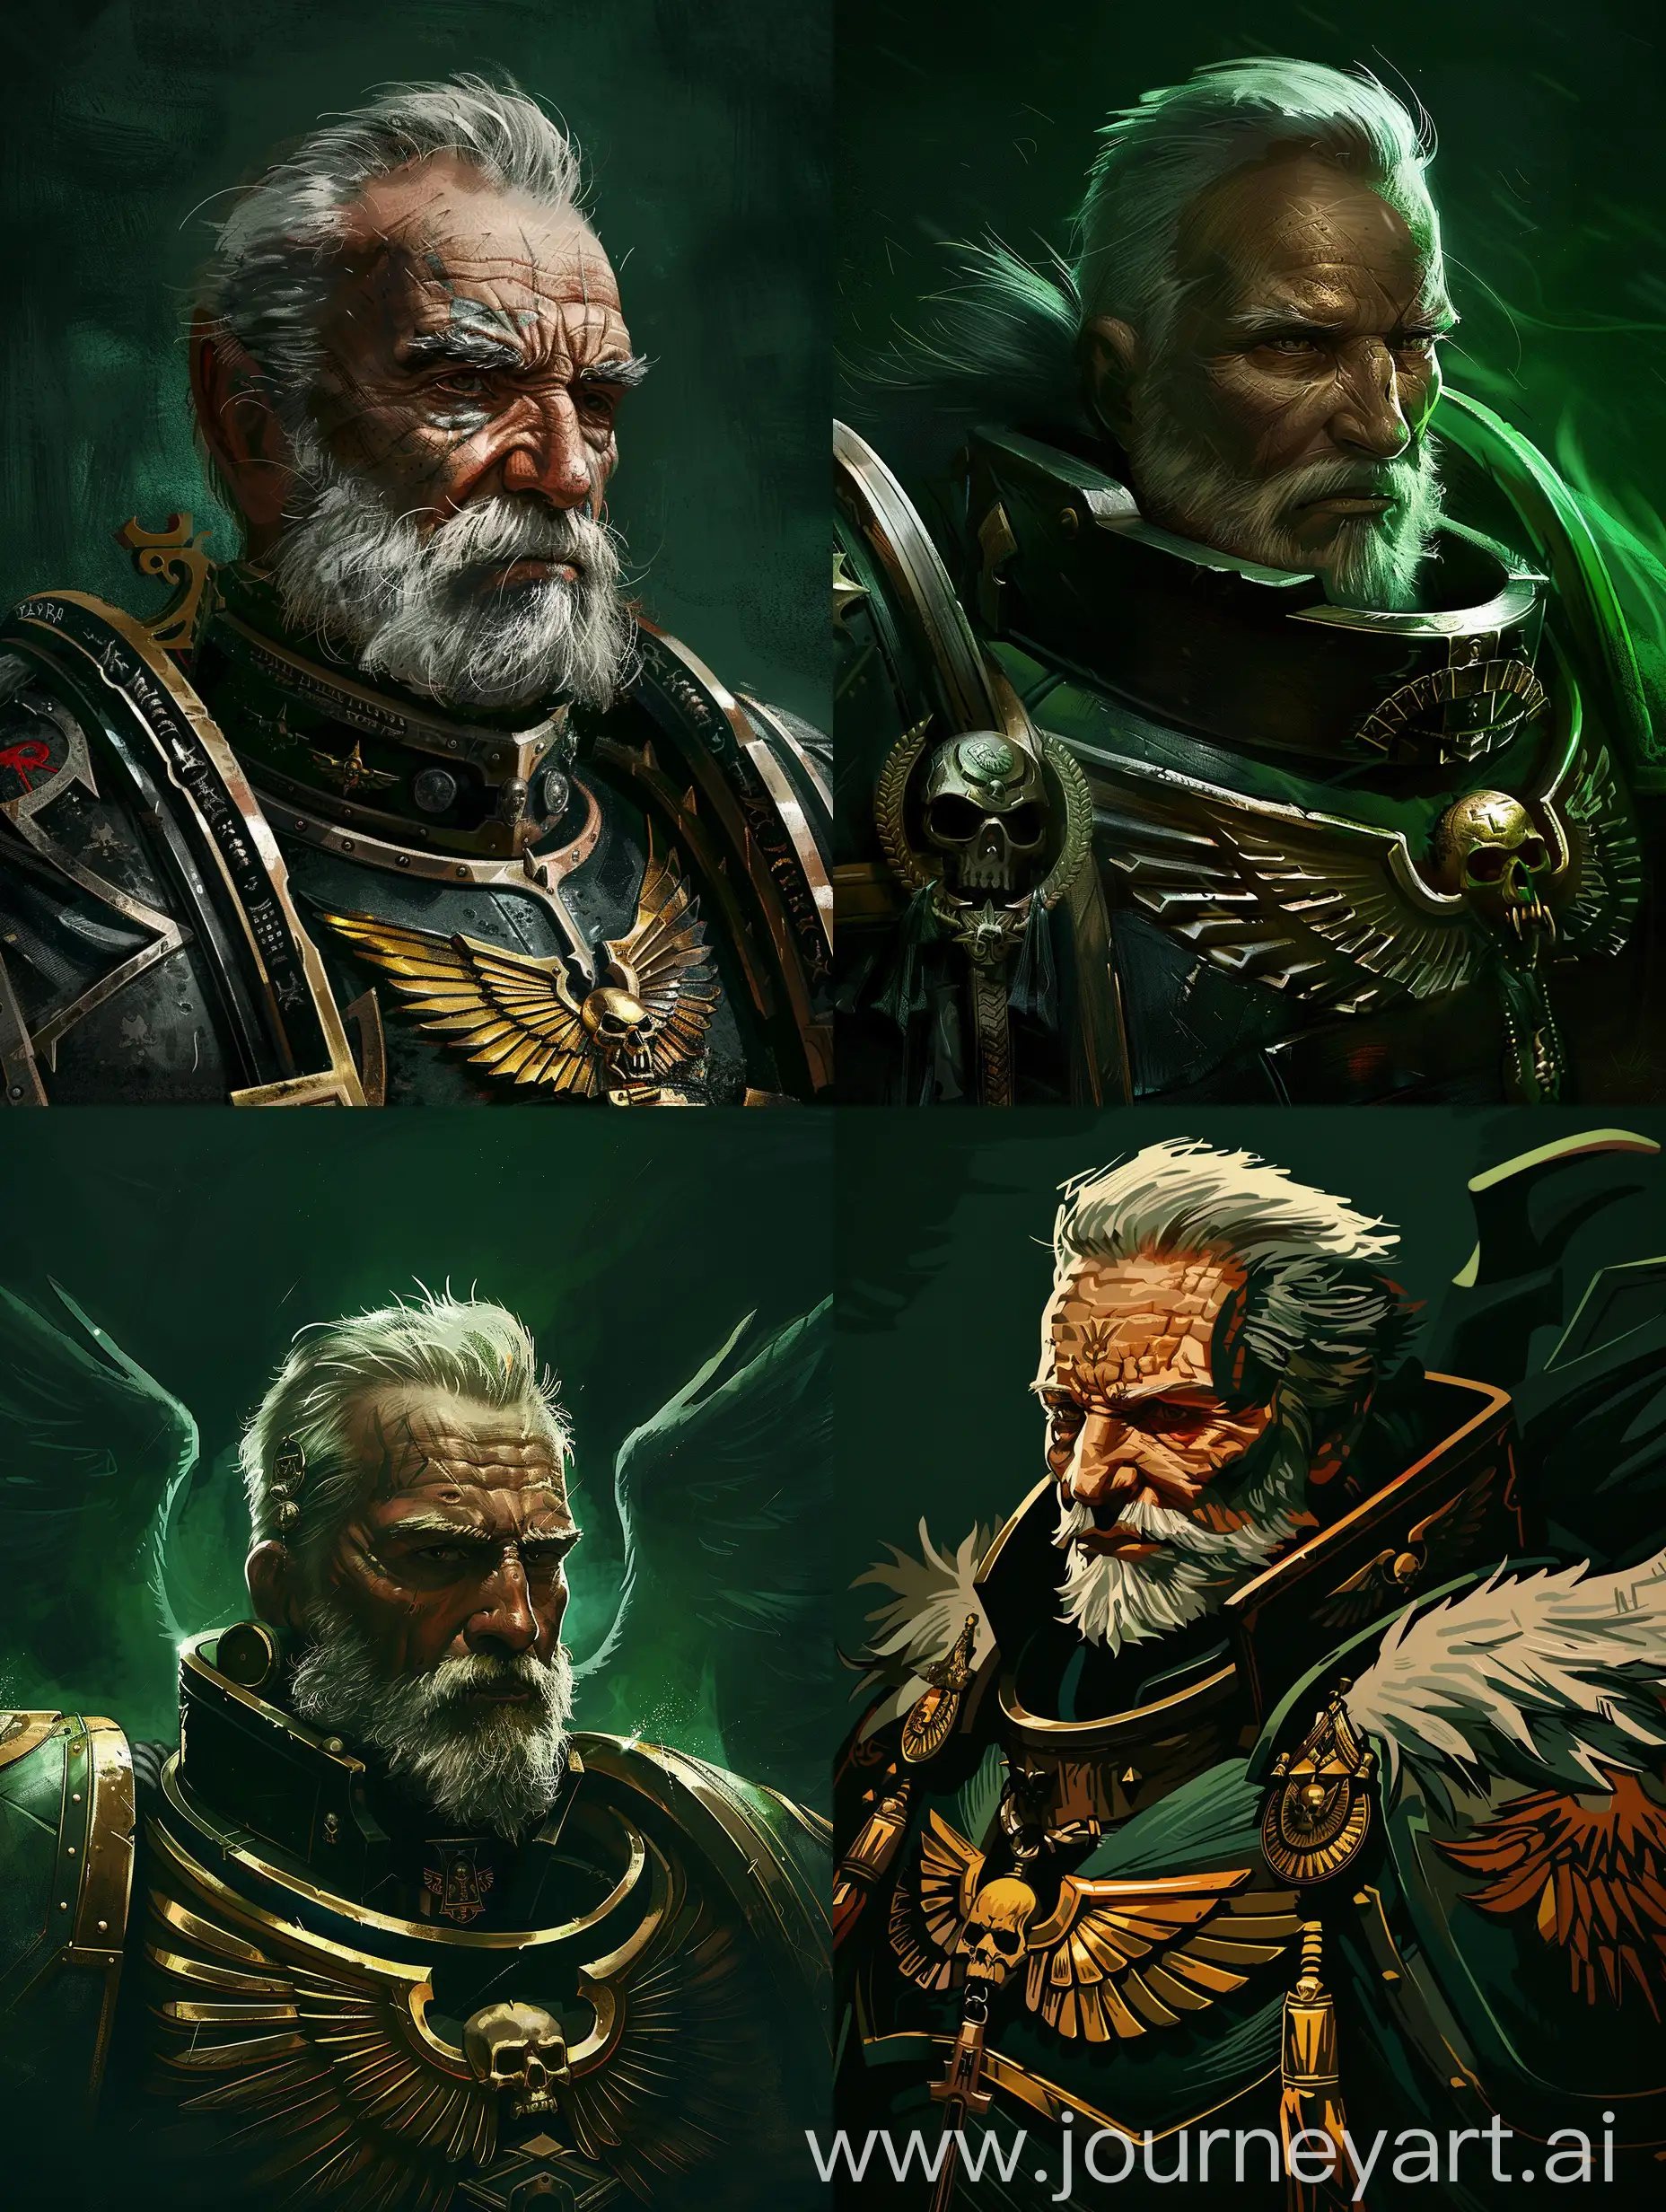 A portrait of Azrael the grand master of the Dark Angels from the Warhammer 40k universe. The background is dark green.